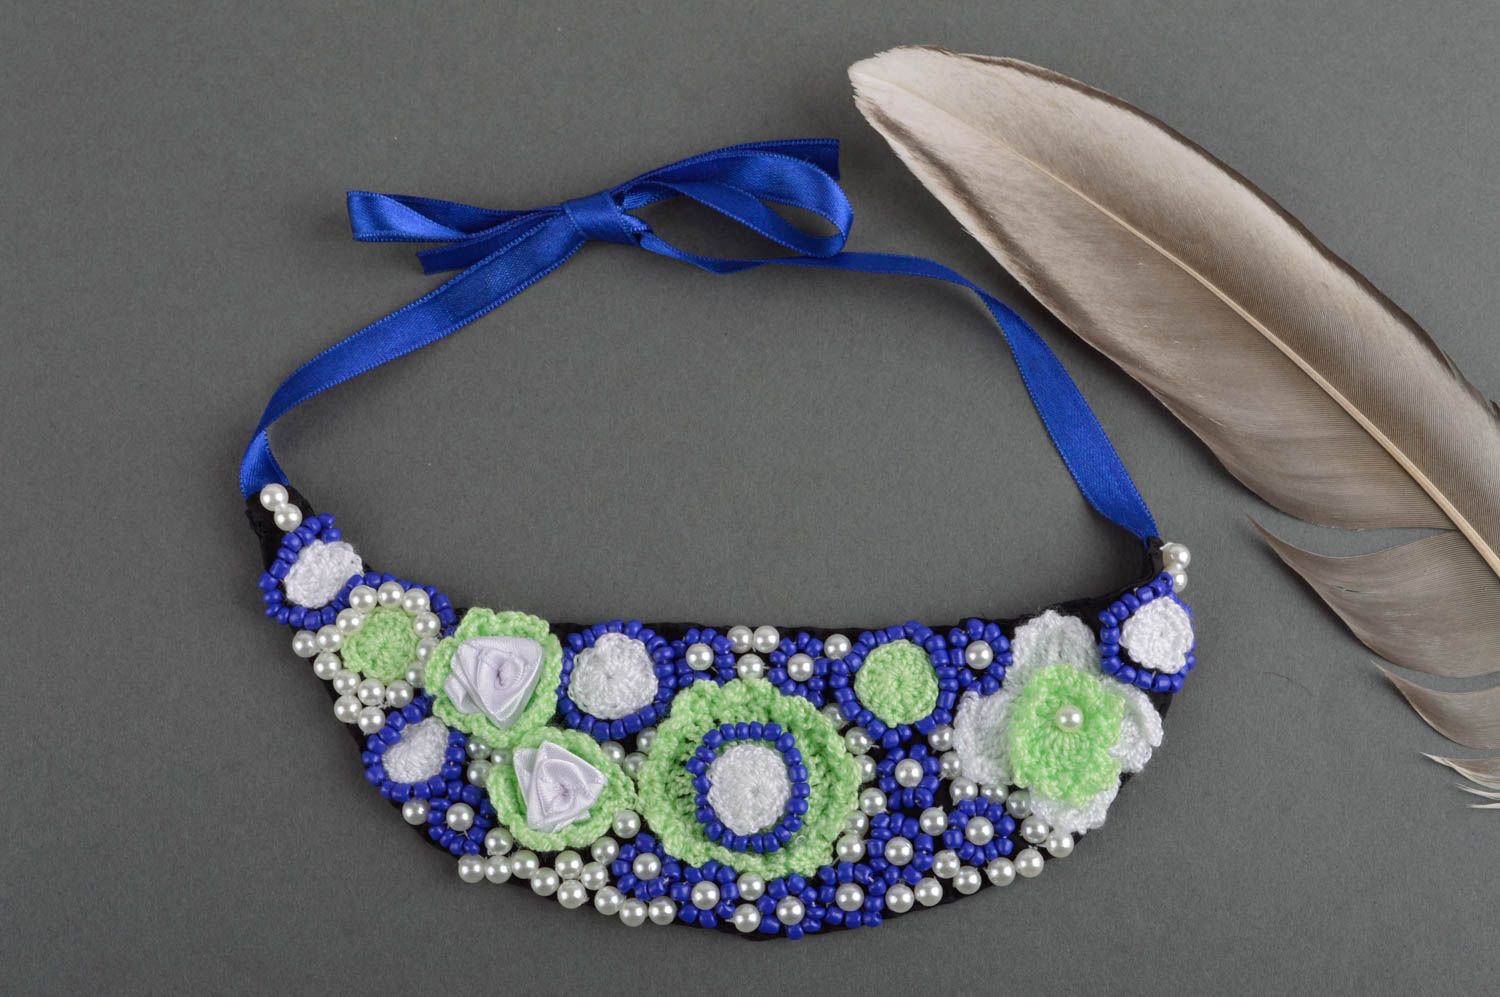 Handmade collar necklace bead embroidery necklace for women fashion accessories photo 1